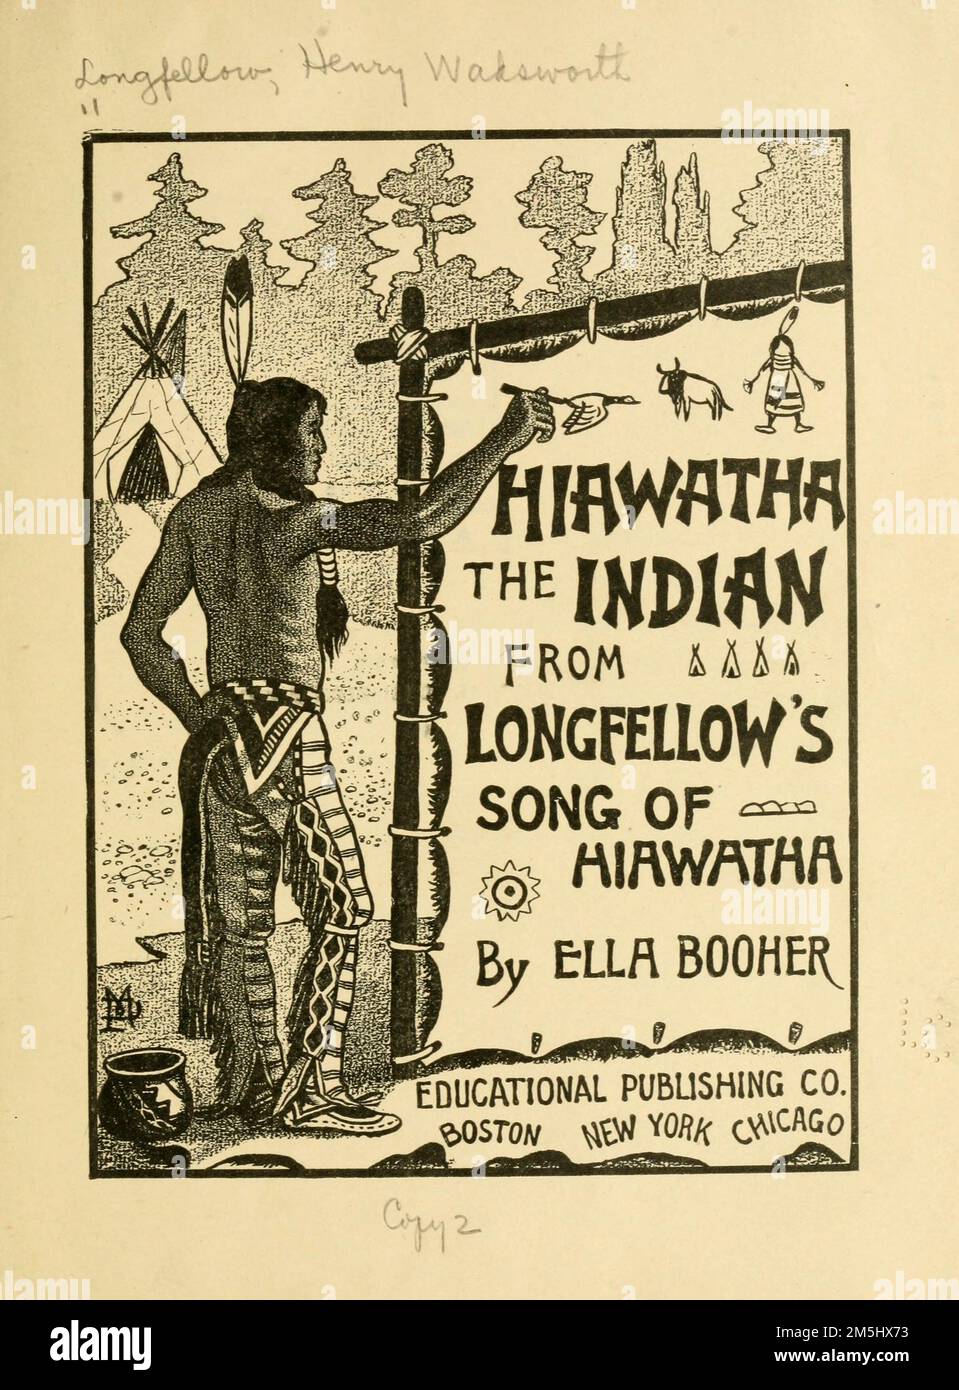 title page illustrated by Ella Booher, From the book Hiawatha the Indian from Longfellow's Song of Hiawatha by Henry Wadsworth Longfellow, 1807-1882; Stock Photo